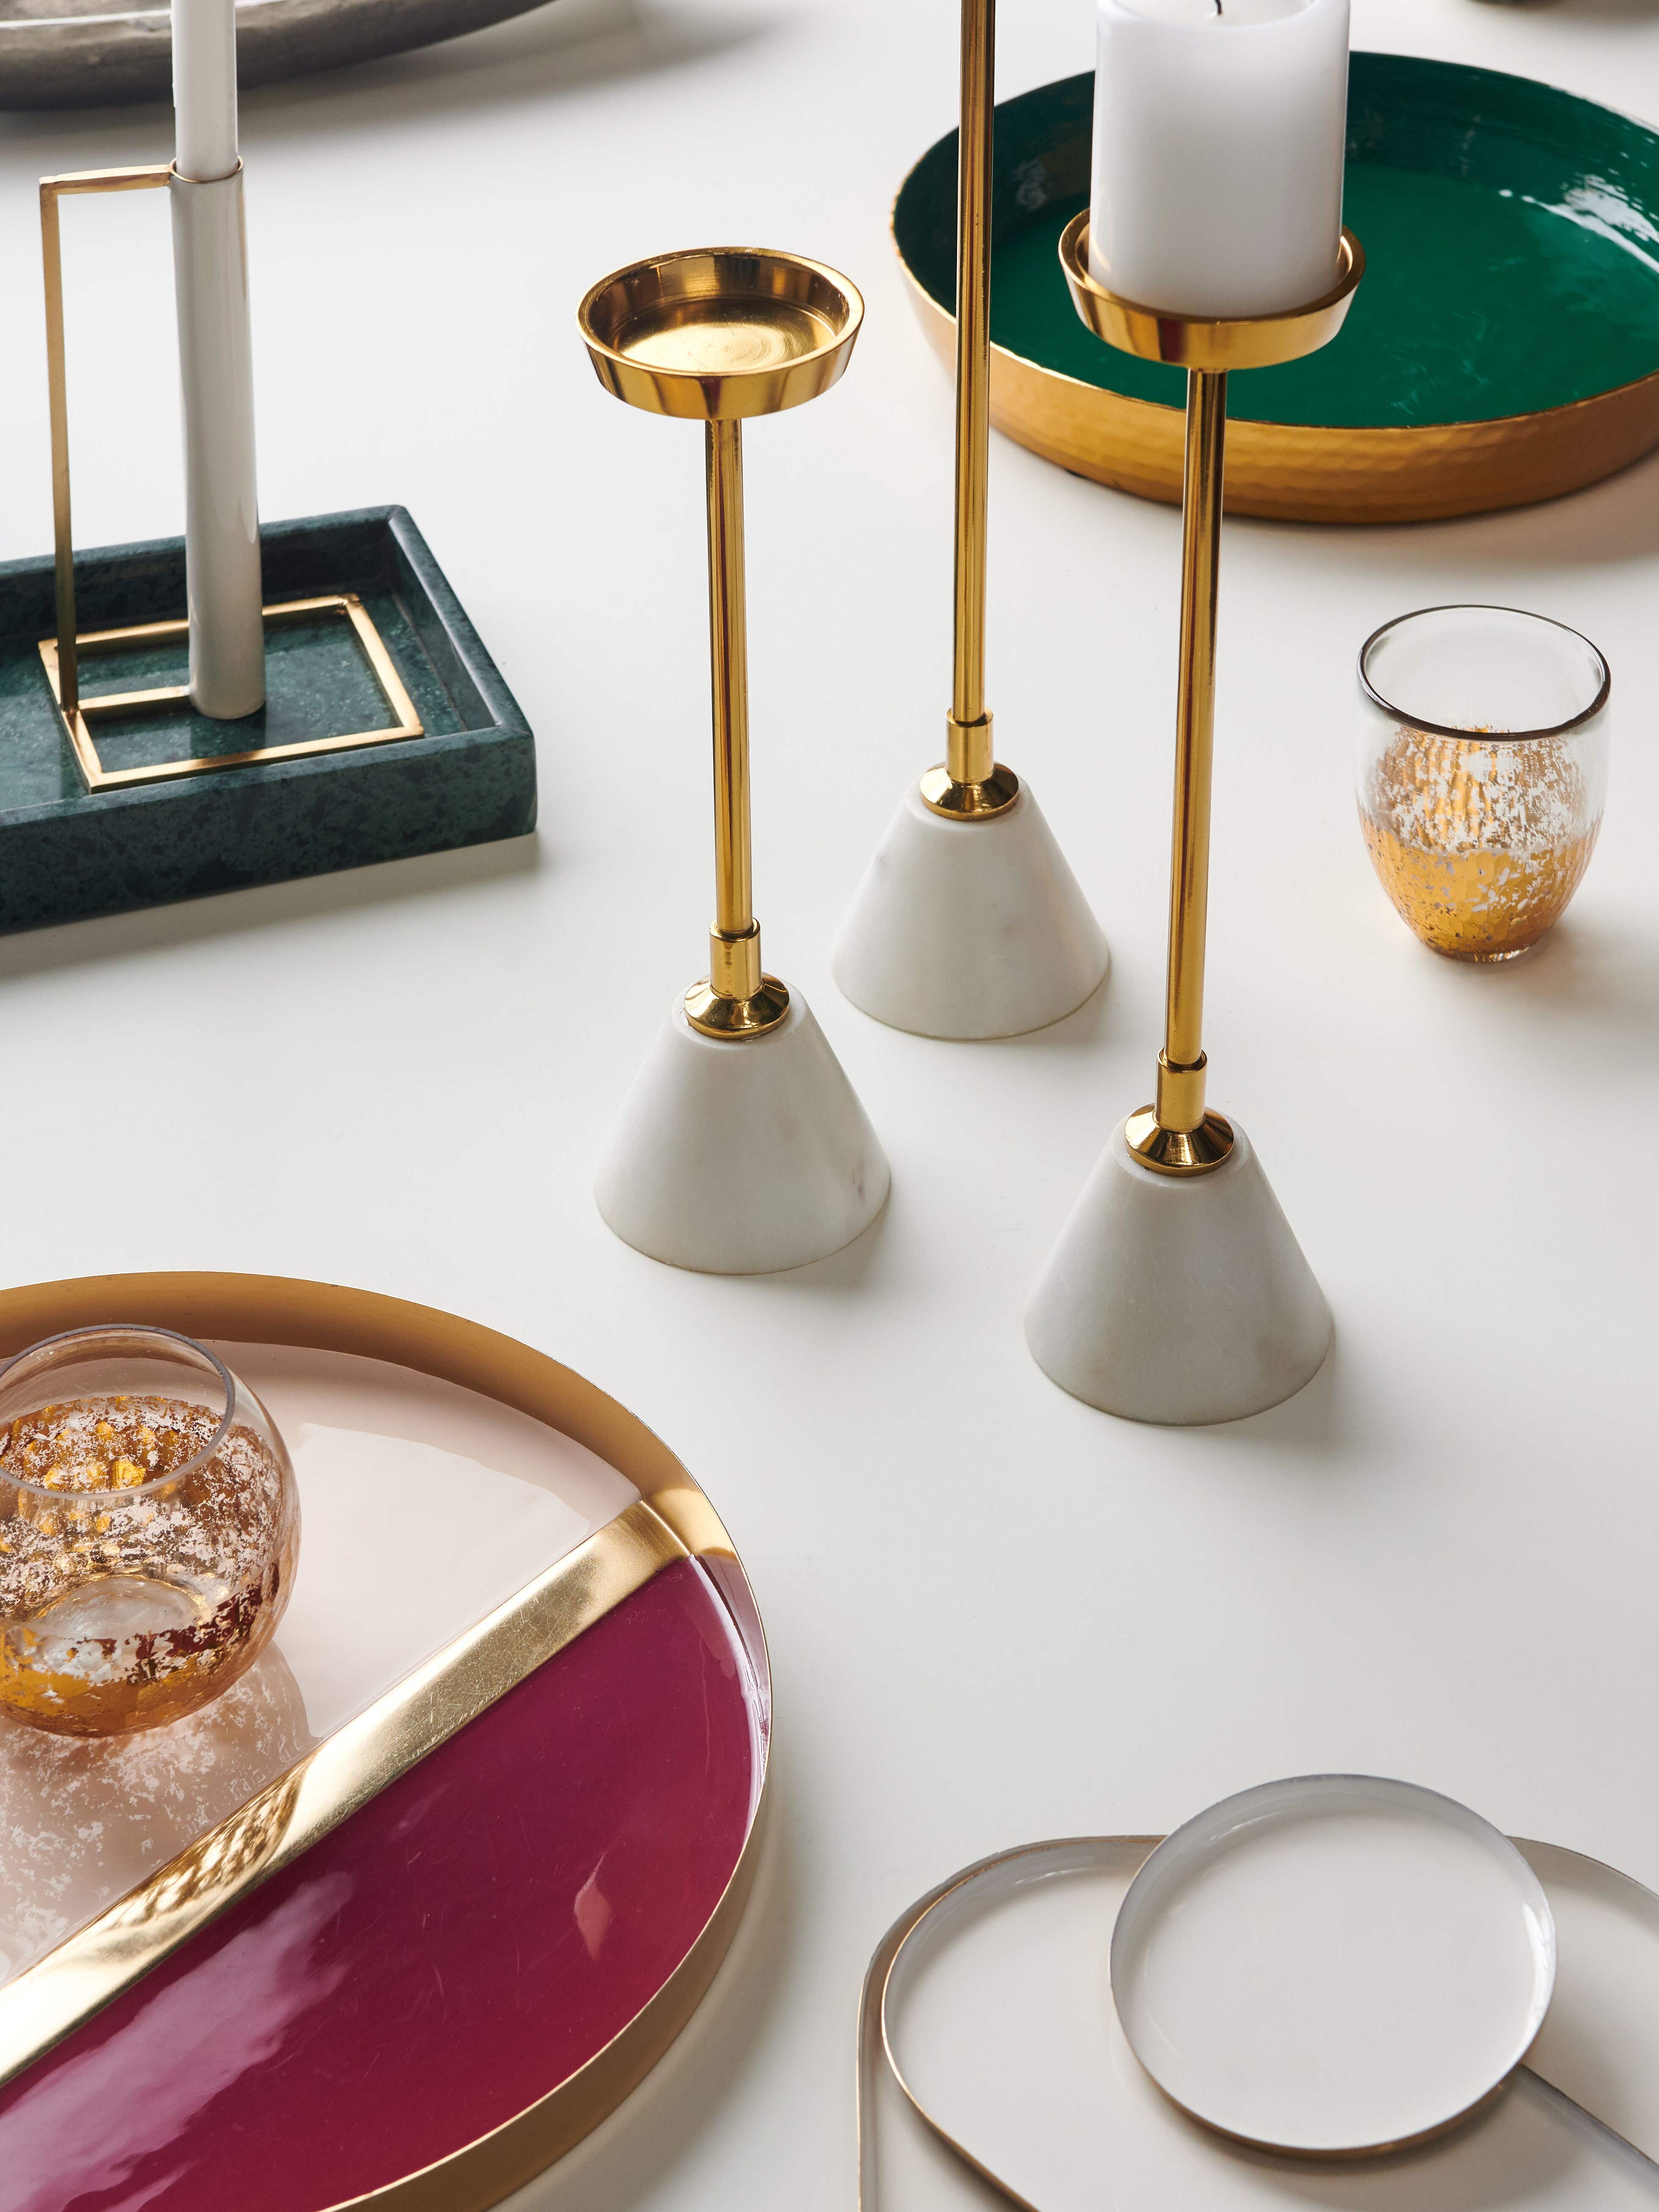 Glam Decor Is Making a Comeback—Shop Our Top 10 Picks